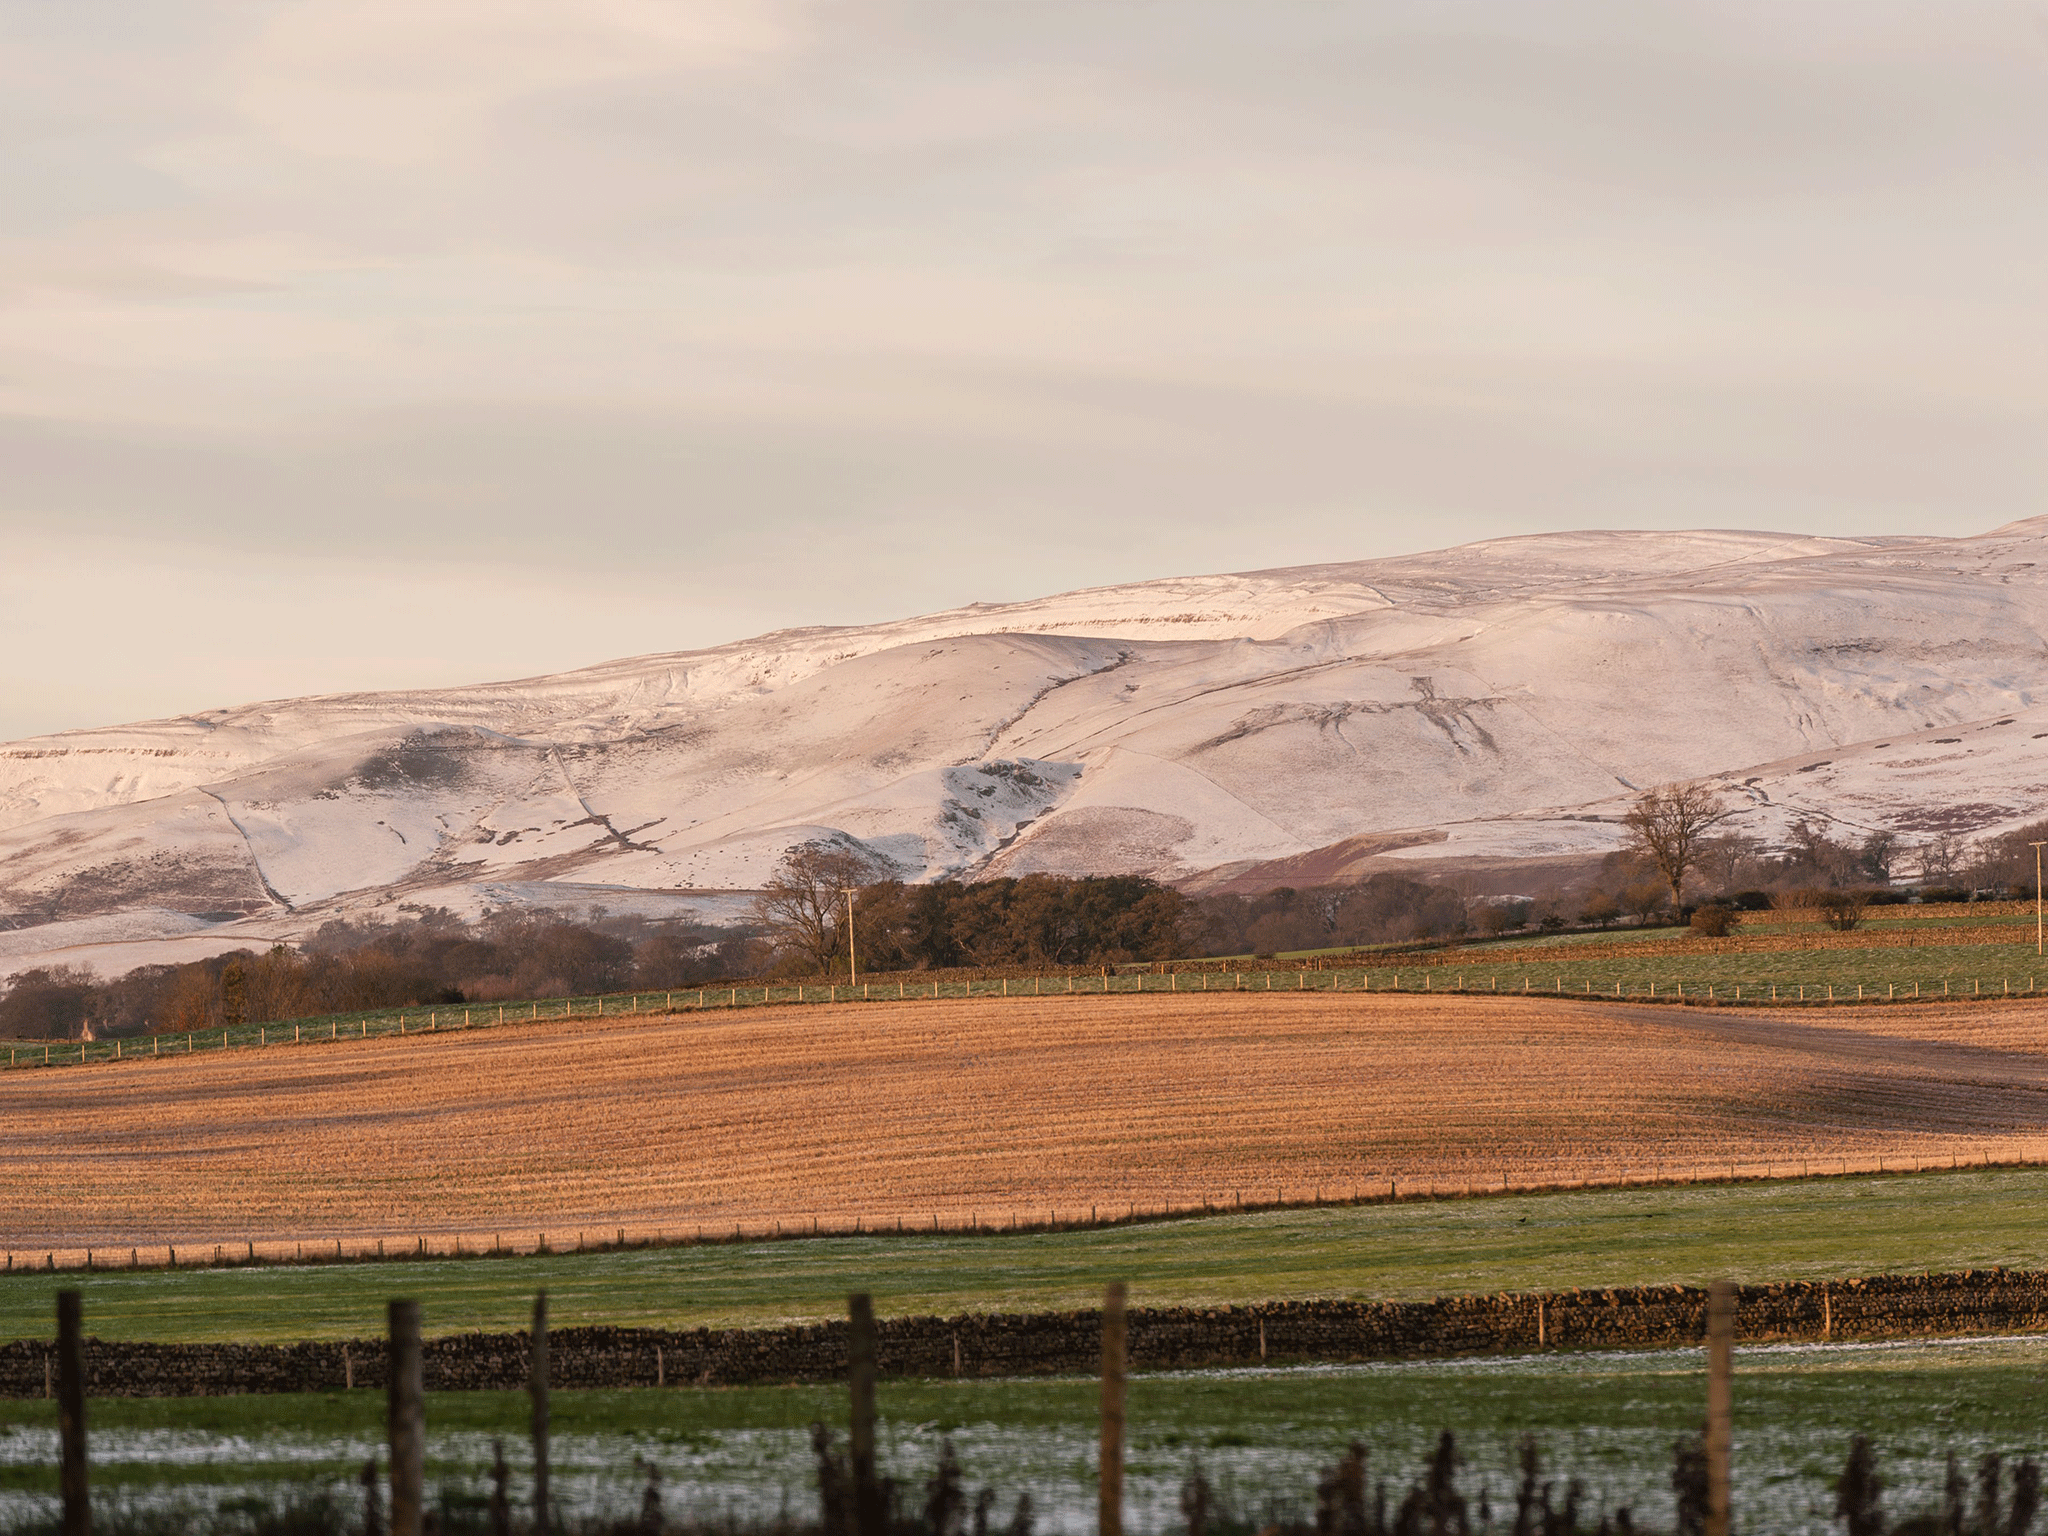 A sprinkling of snow is likely in higher altitudes such as here in Cumbria in north-west England